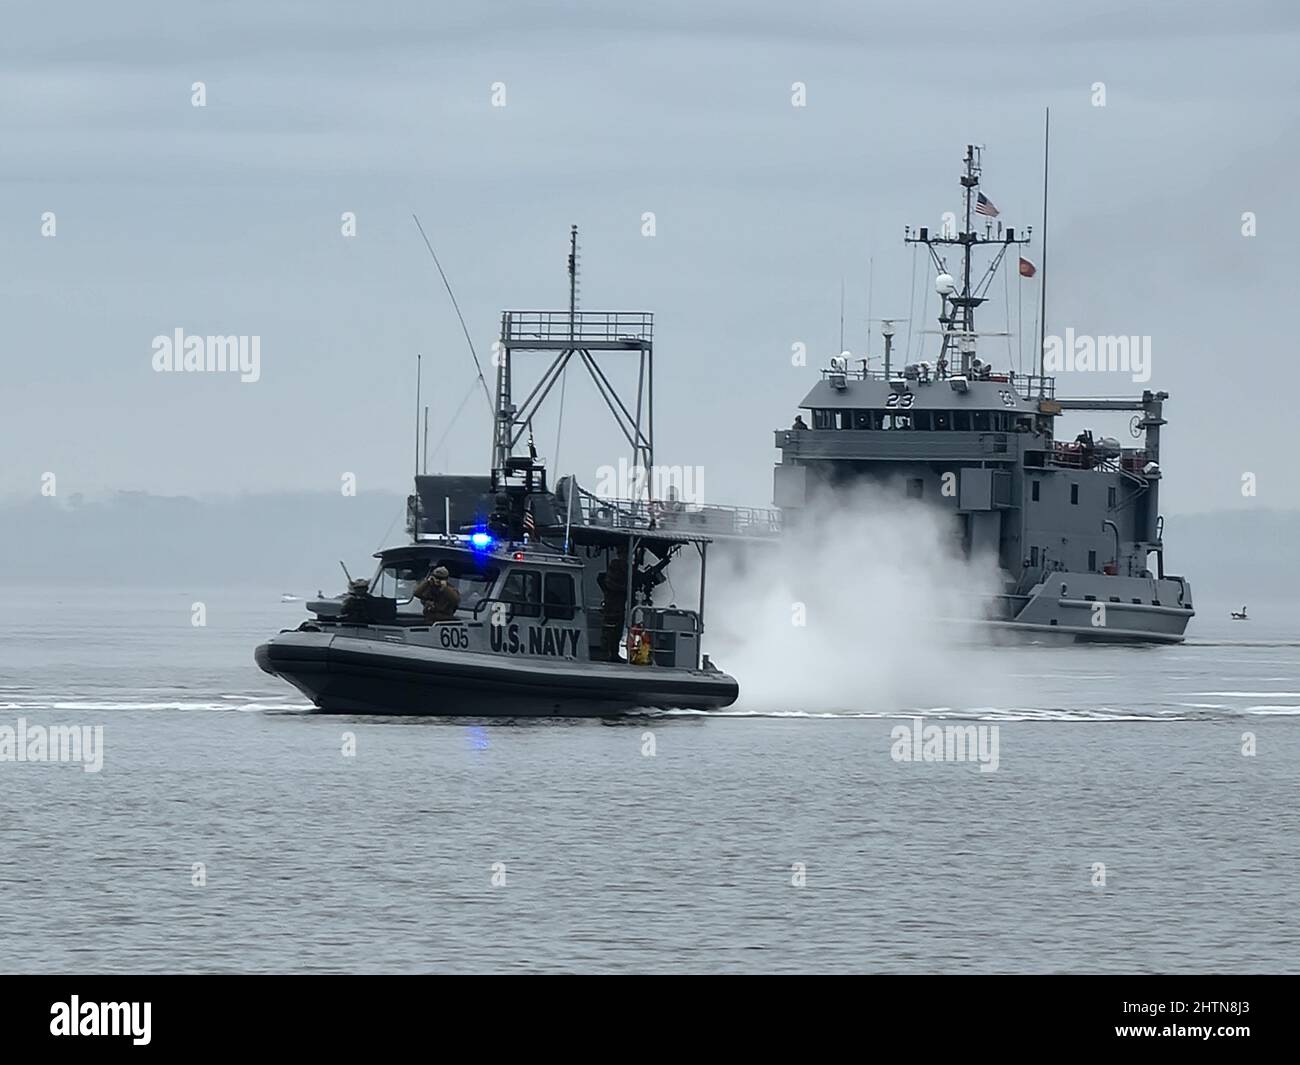 Fort Eustis, Virginia (February 03, 2022) Sailors assigned to Maritime Expeditionary Security Squadron TWO (MSRON 2) conduct a High Value Asset escort of US Army Runnymede-class large landing craft USAV HOBKIRK (LCU 2023) of the 329th Composite Watercraft Company (CWC) during MSRON 2’s Final Evaluation Problem (FEP).  The ability to protect vessels transiting choke points or entering and departing ports is essential to MSRON 2’s ability to support the fleet and joint force in conducting maritime and combat operations.   (U.S. Navy photo by Boatswain’s Mate 1st Class Marc Elevado) Stock Photo